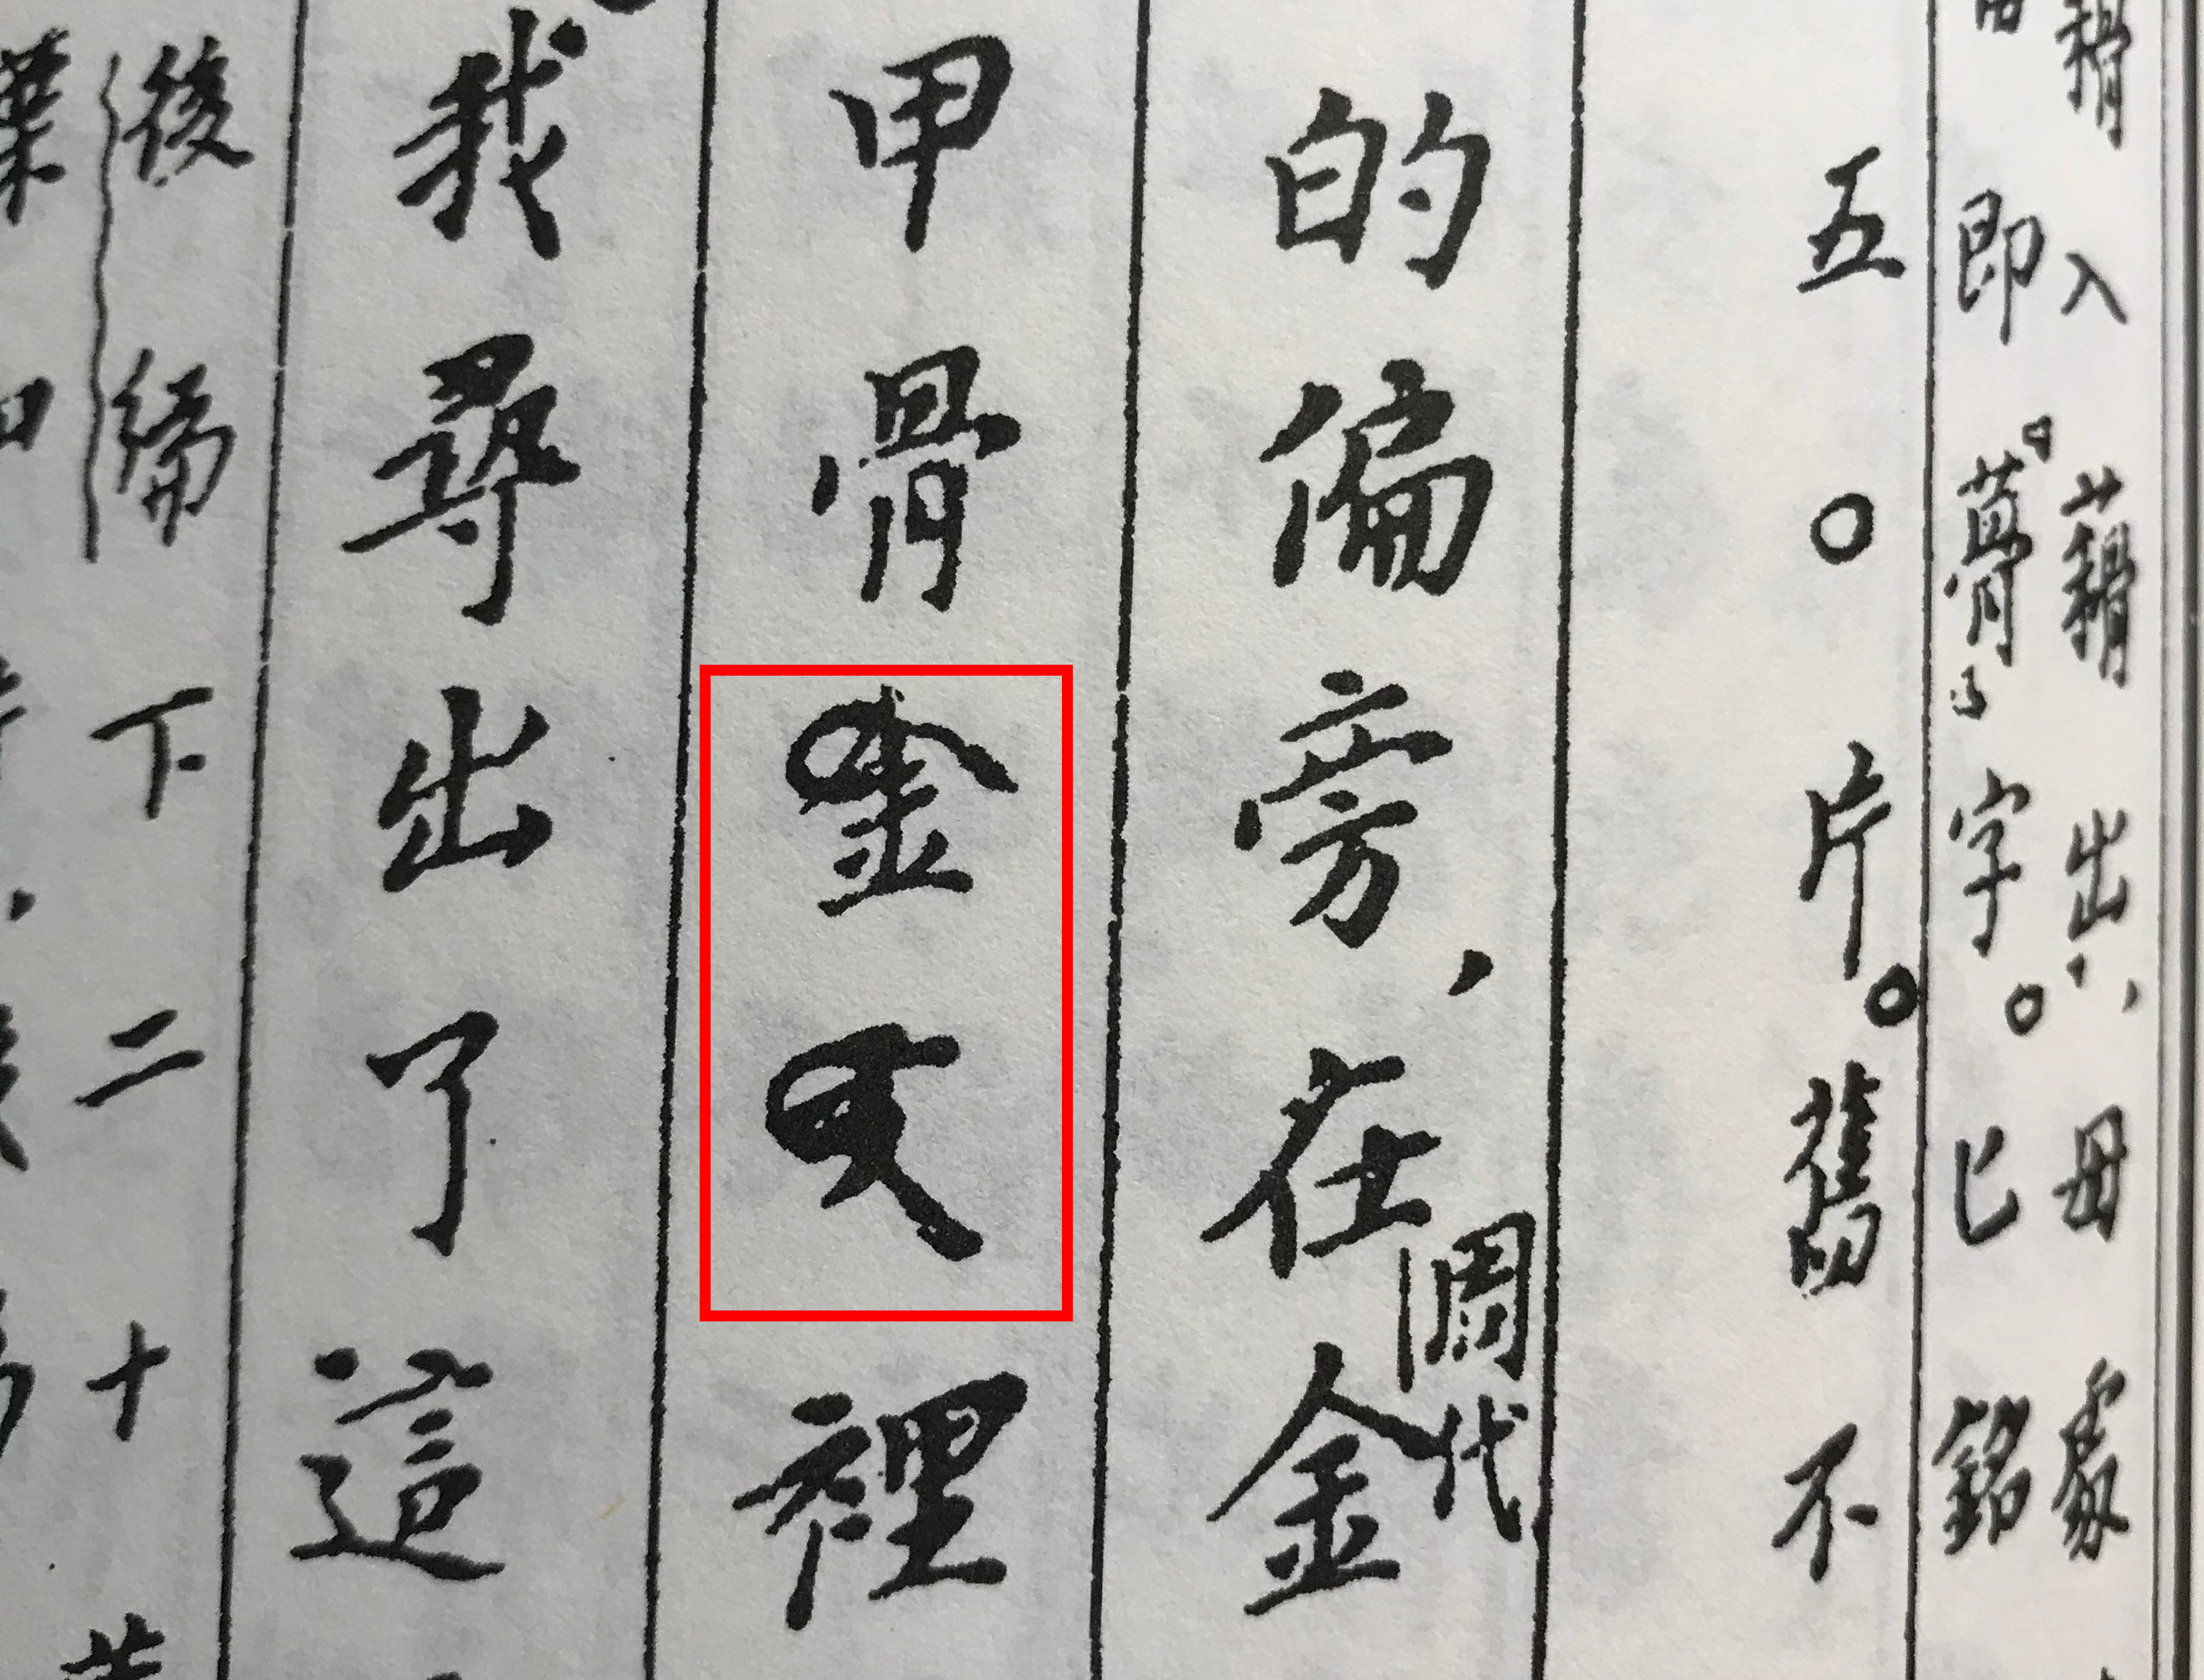 the old character-deleting symbol used in a 20th-century Chinese book